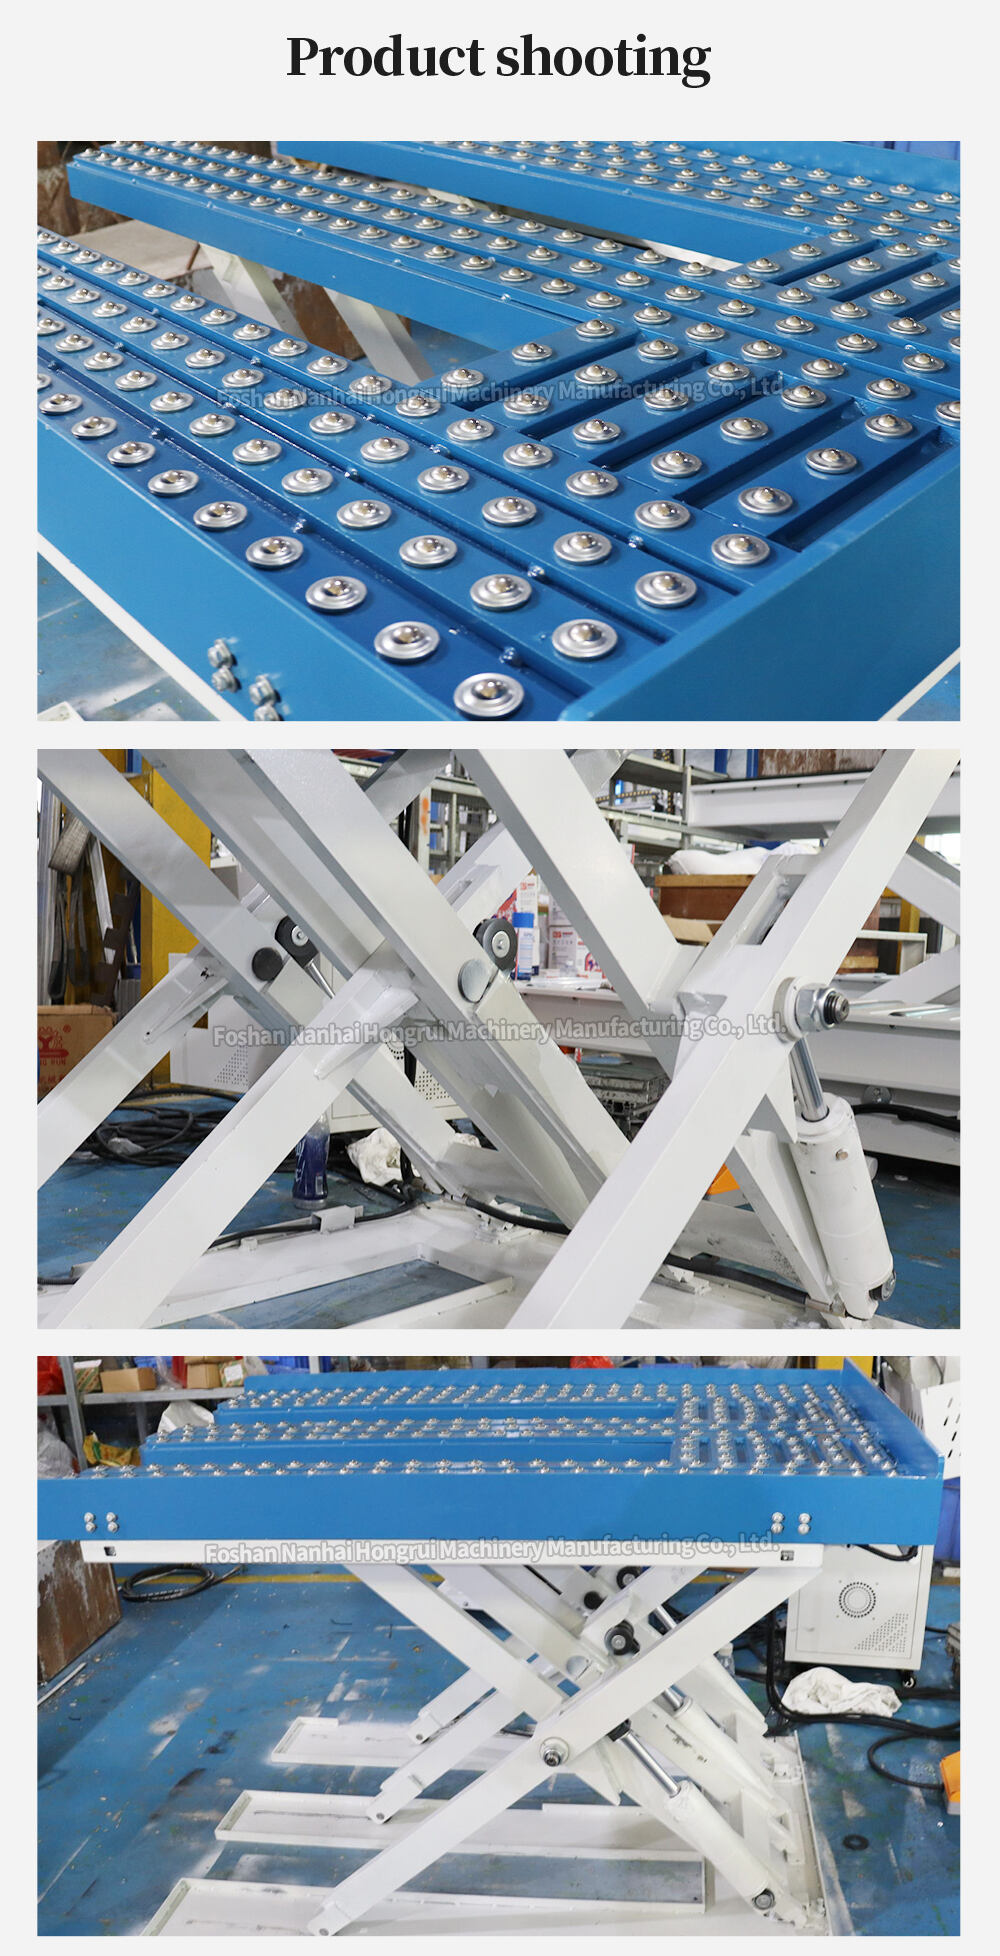 Woodworking hydraulic scissor type lifting table with roller conveyor used as feeder for panel saw and door cutting machine manufacture